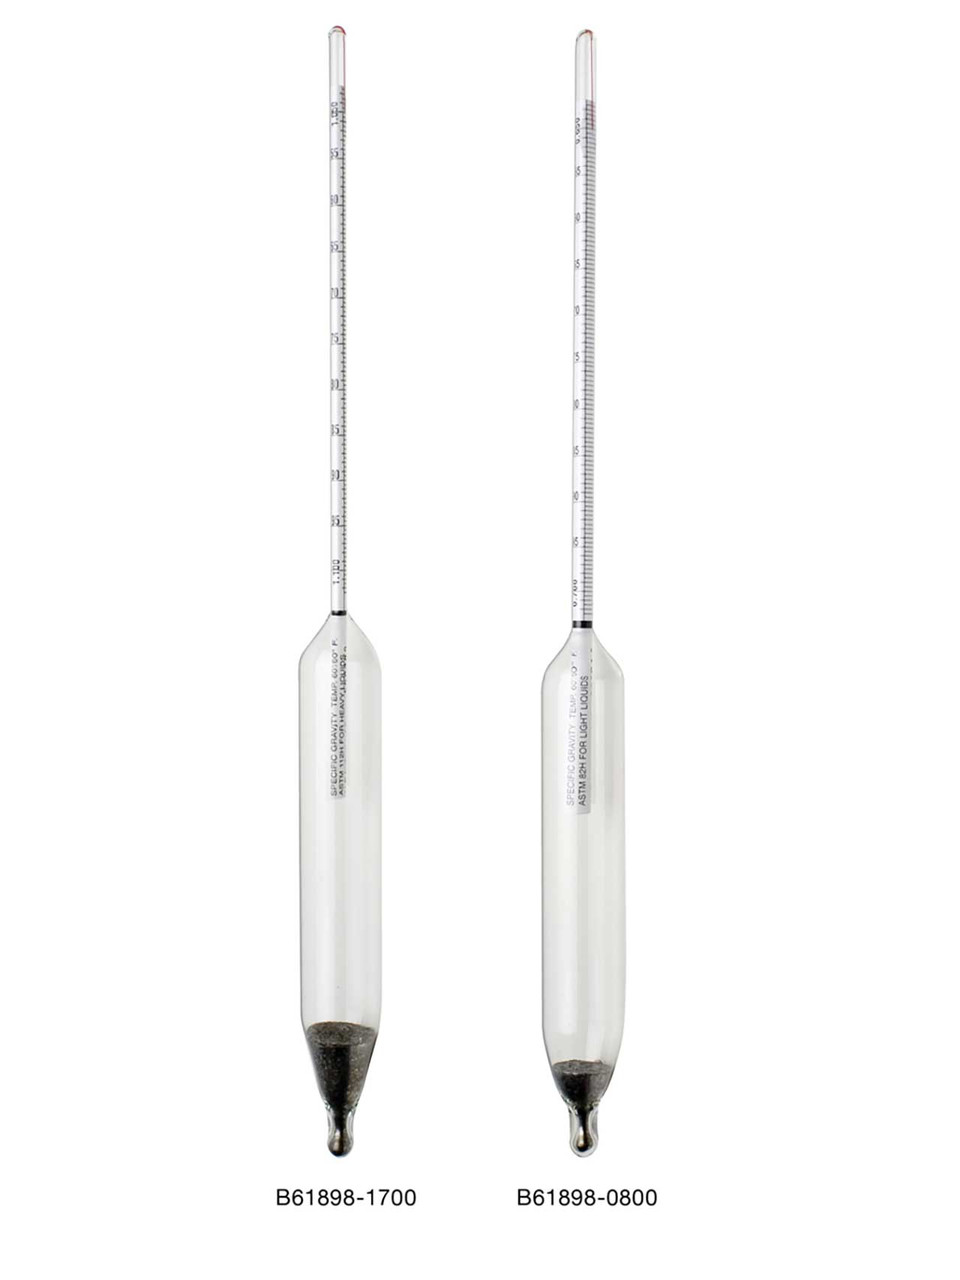 Specific Gravity Bottle, Serialized Pycnometer, with Non-Mercury Thermometer